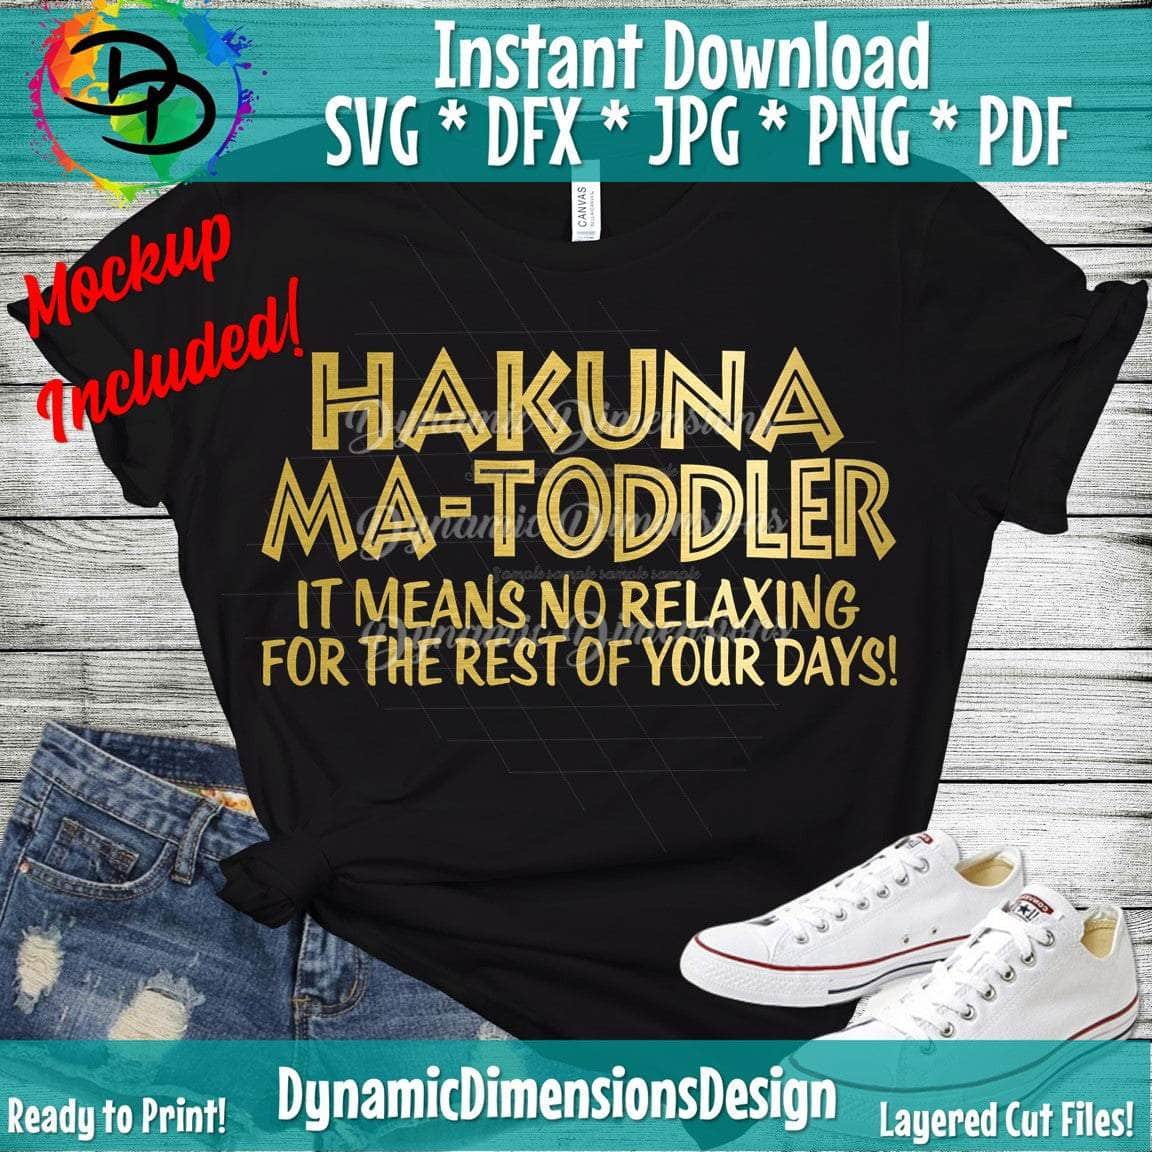 Hakuna Ma-Toddler It Means no resting the rest of your days!